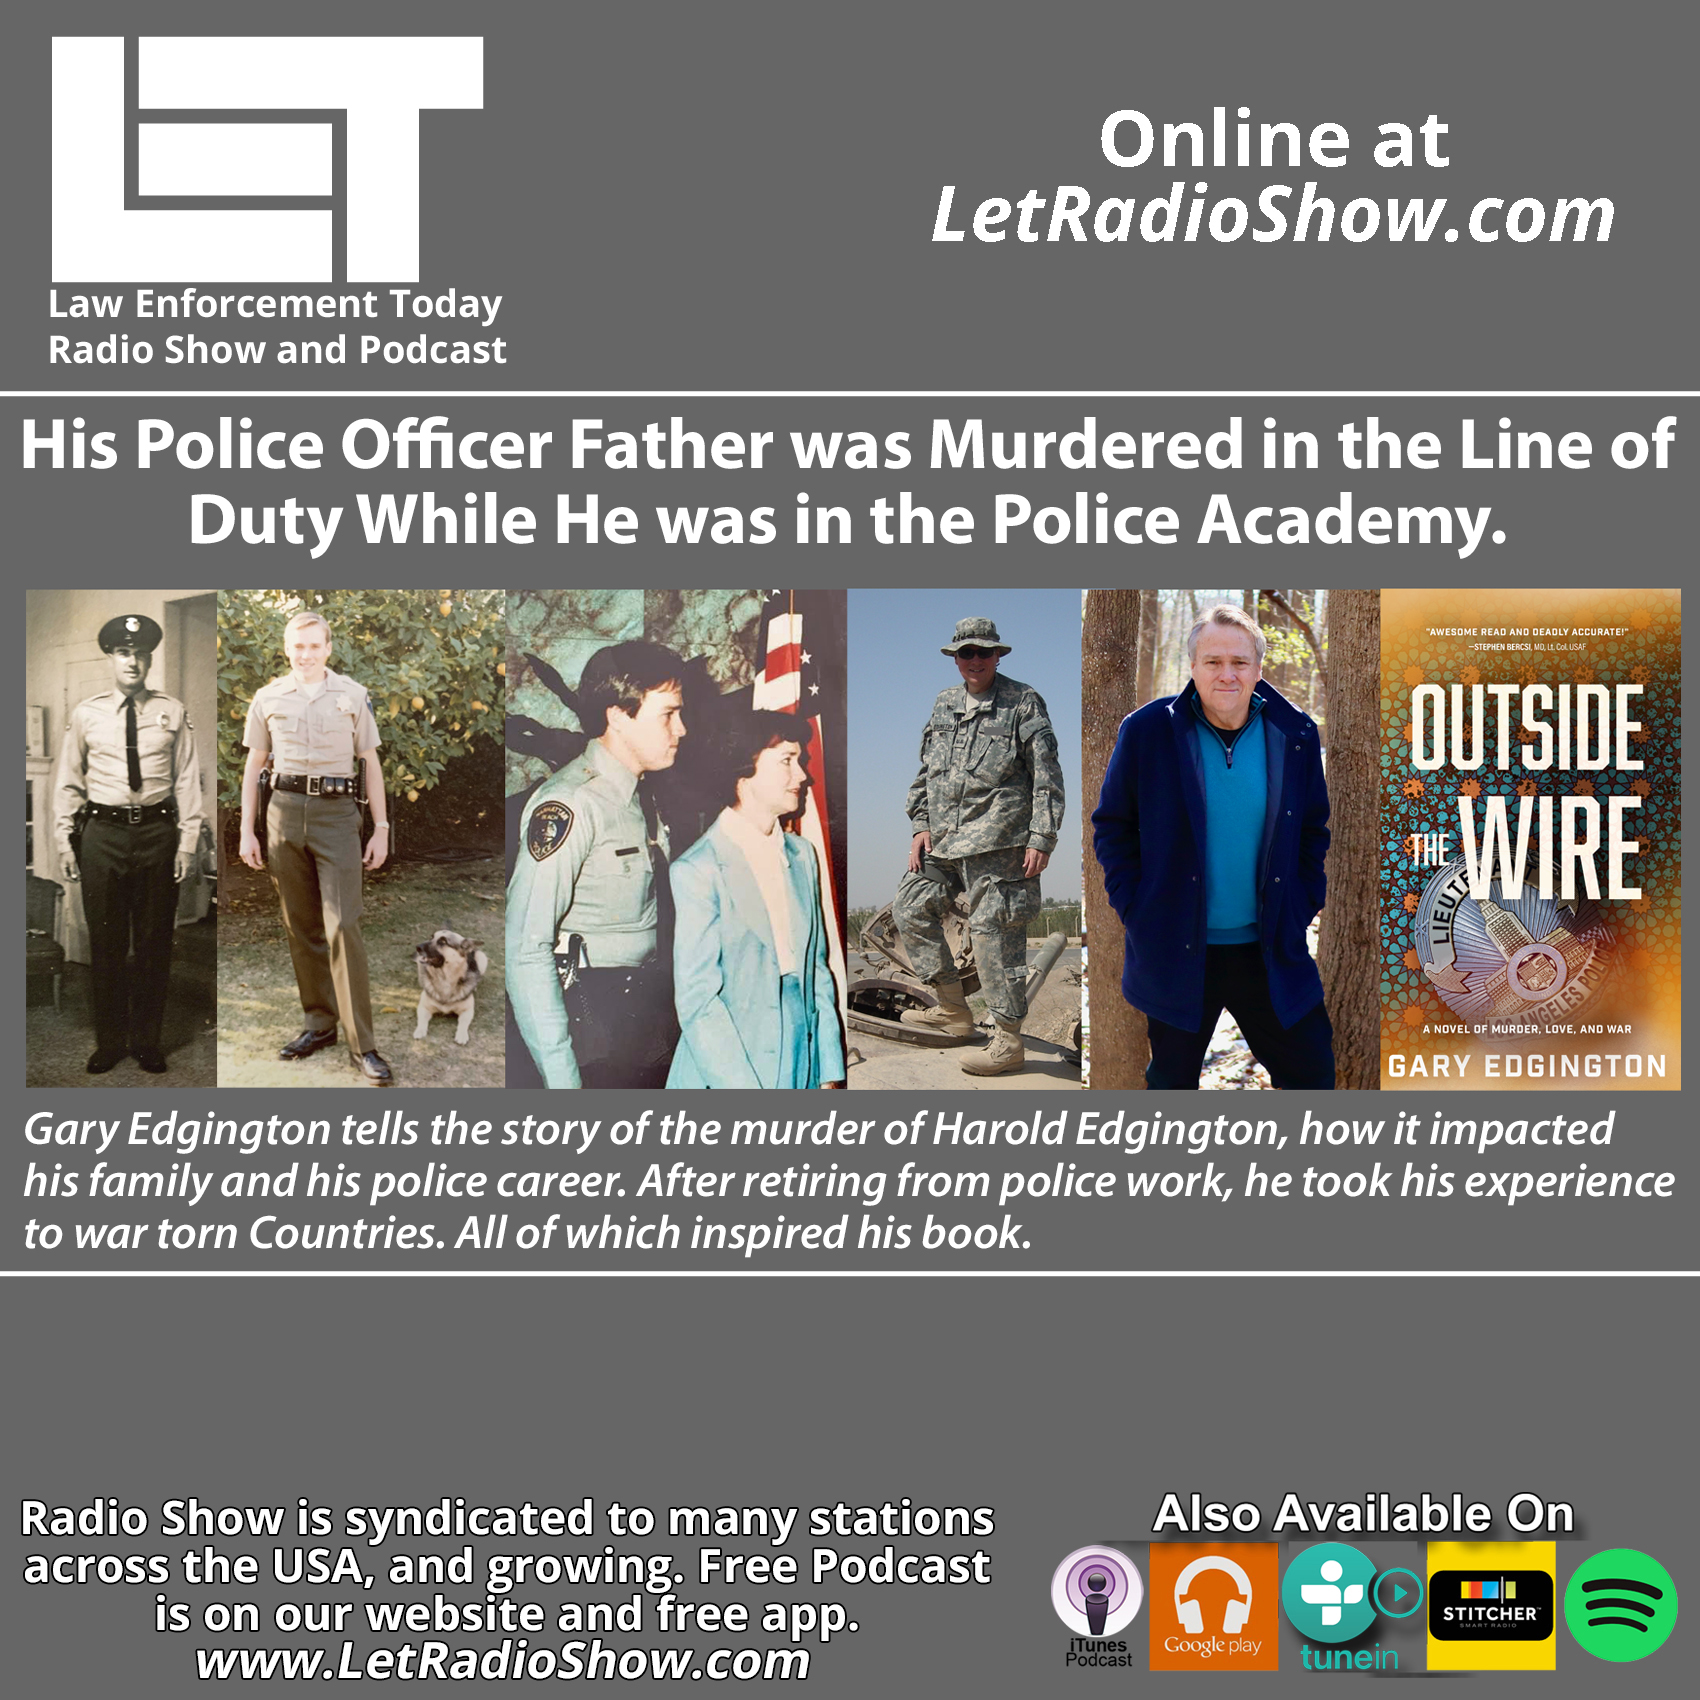 Murder of his Police Officer Father While he was in the Academy.